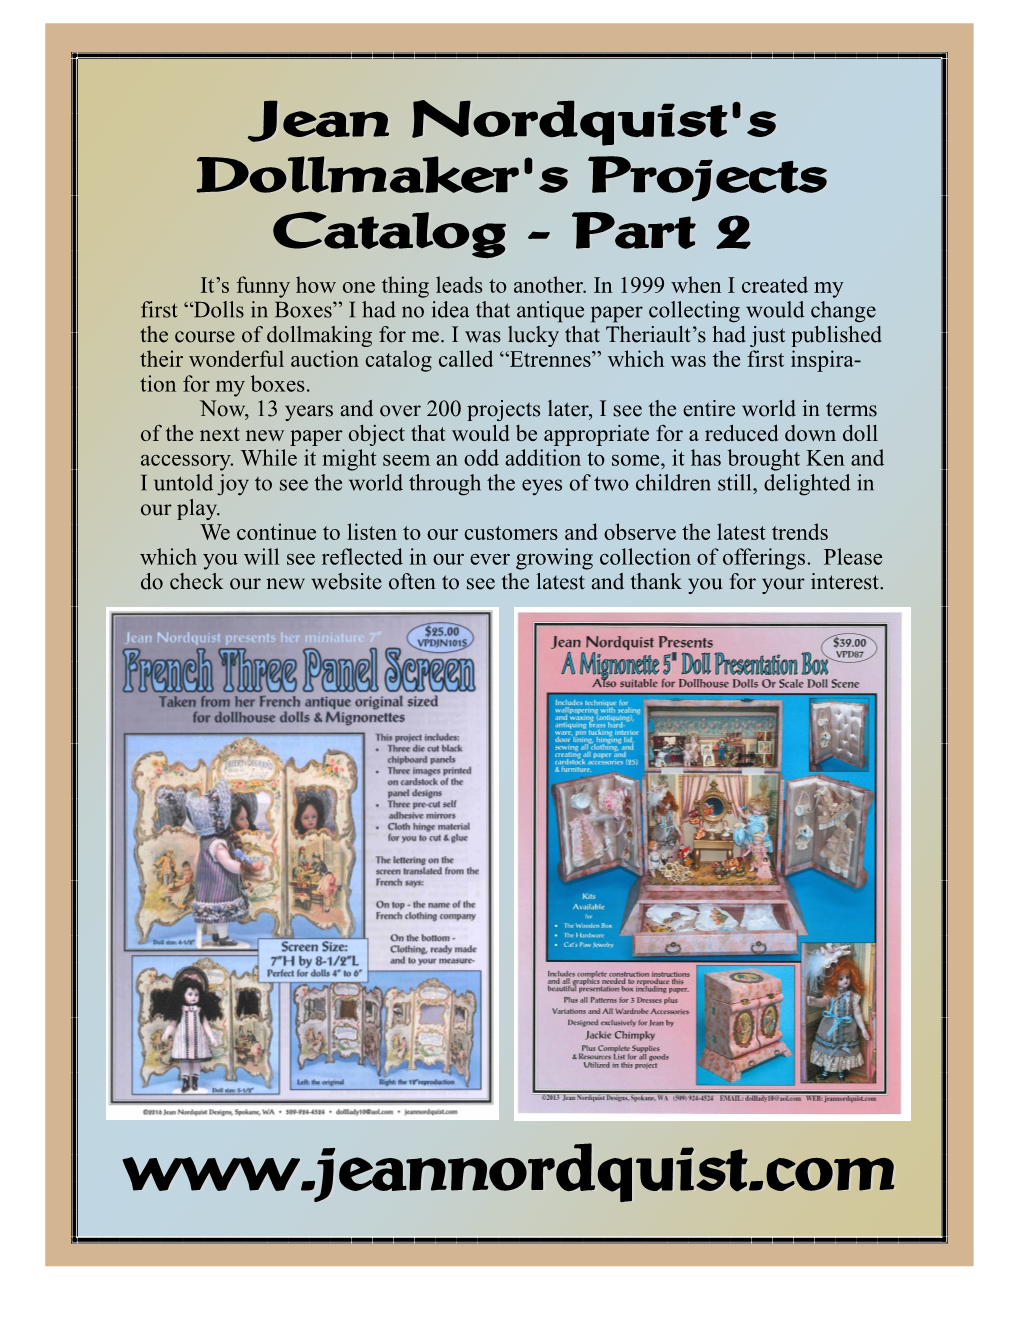 Dolls in Boxes” I Had No Idea That Antique Paper Collecting Would Change the Course of Dollmaking for Me